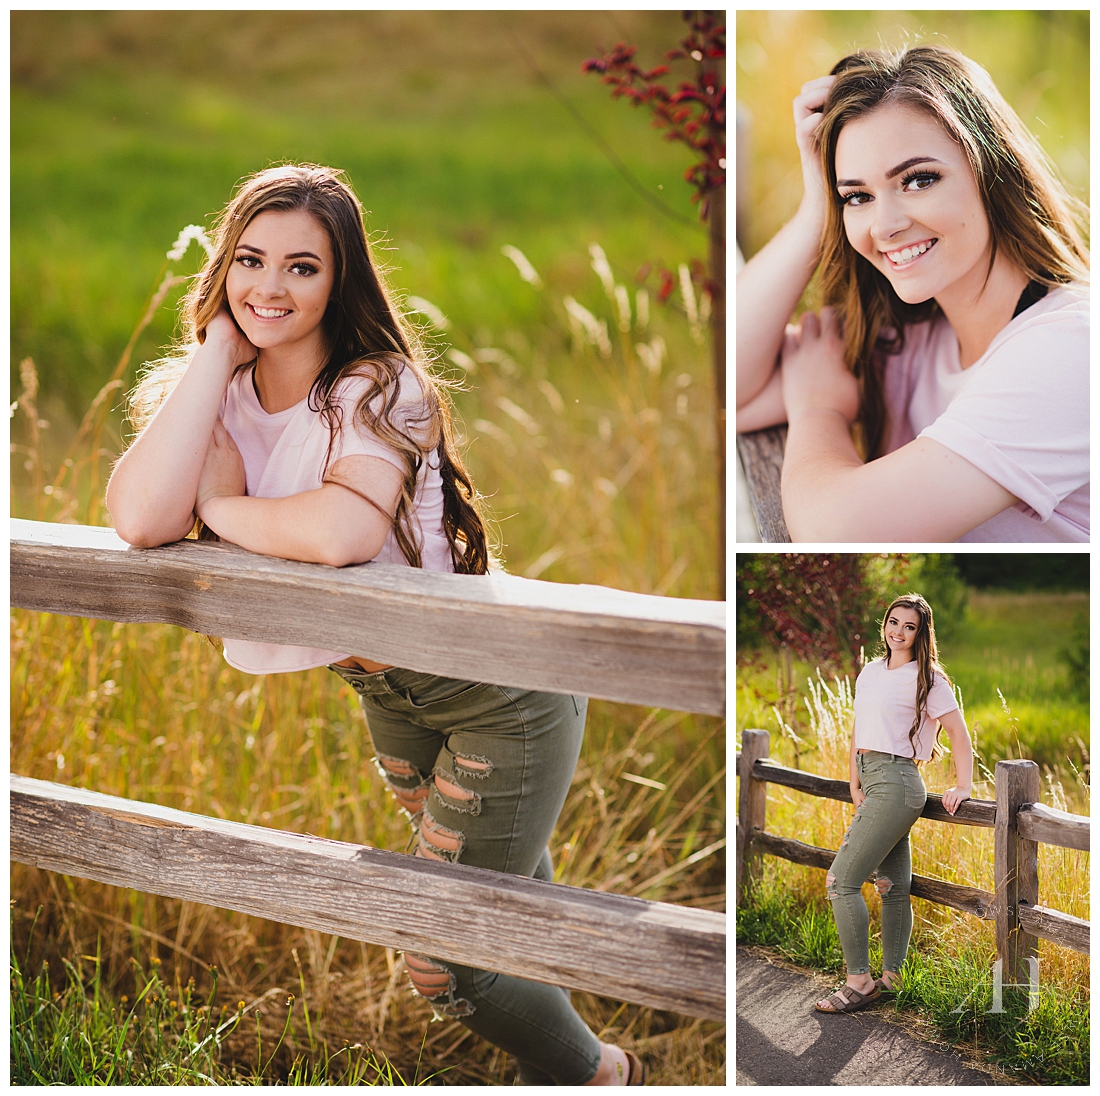 Senior Portraits with rustic wood fencing and casual outfit inspo photographed by Tacoma Senior Photographer Amanda Howse